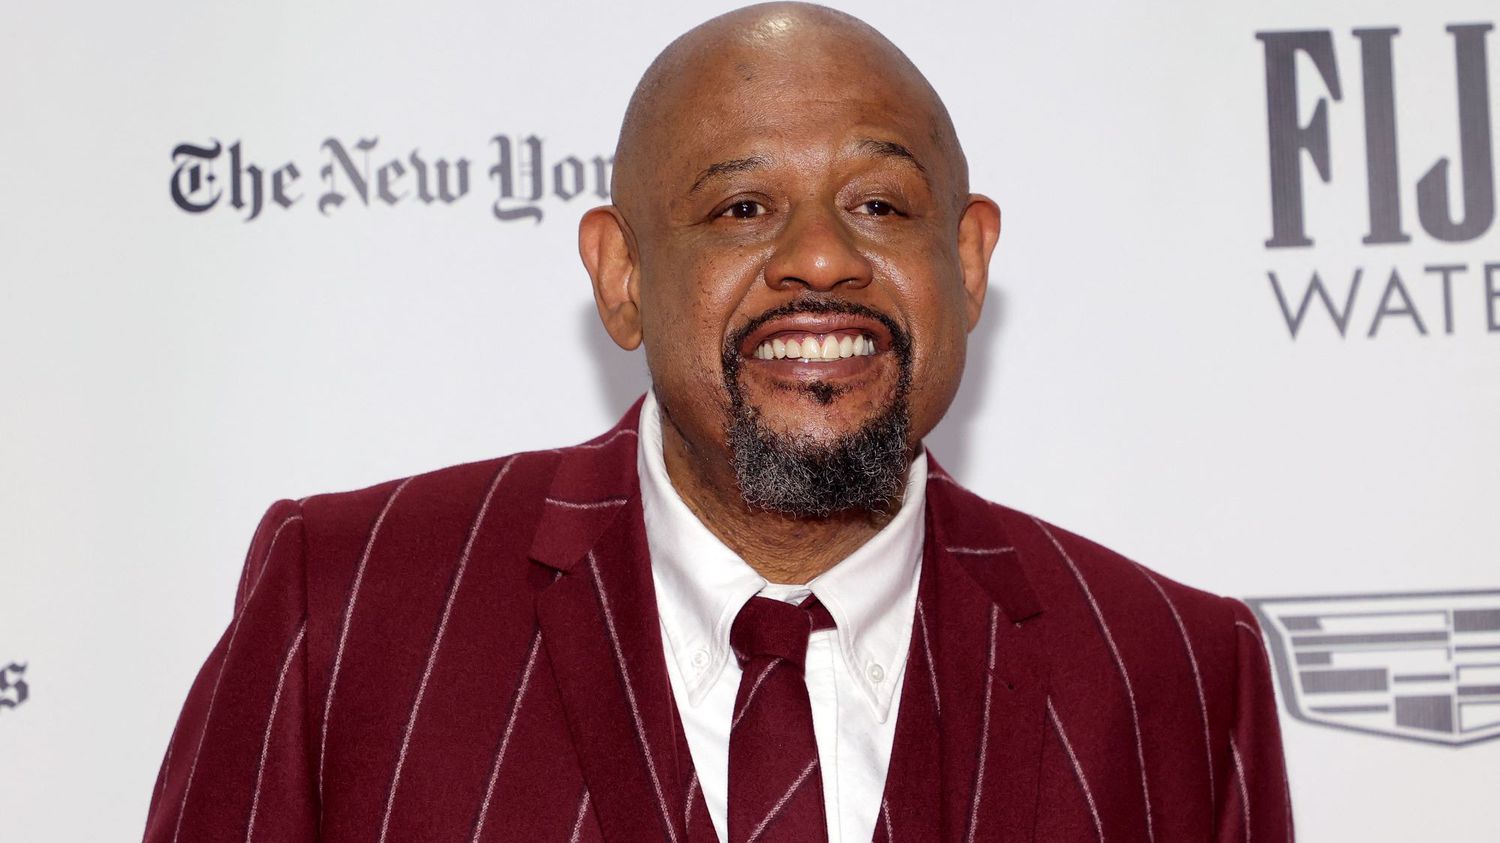 Cannes Film Festival: Oscar-winning actor Forest Whitaker will receive an honorary Palme d'Or at the 75th edition
